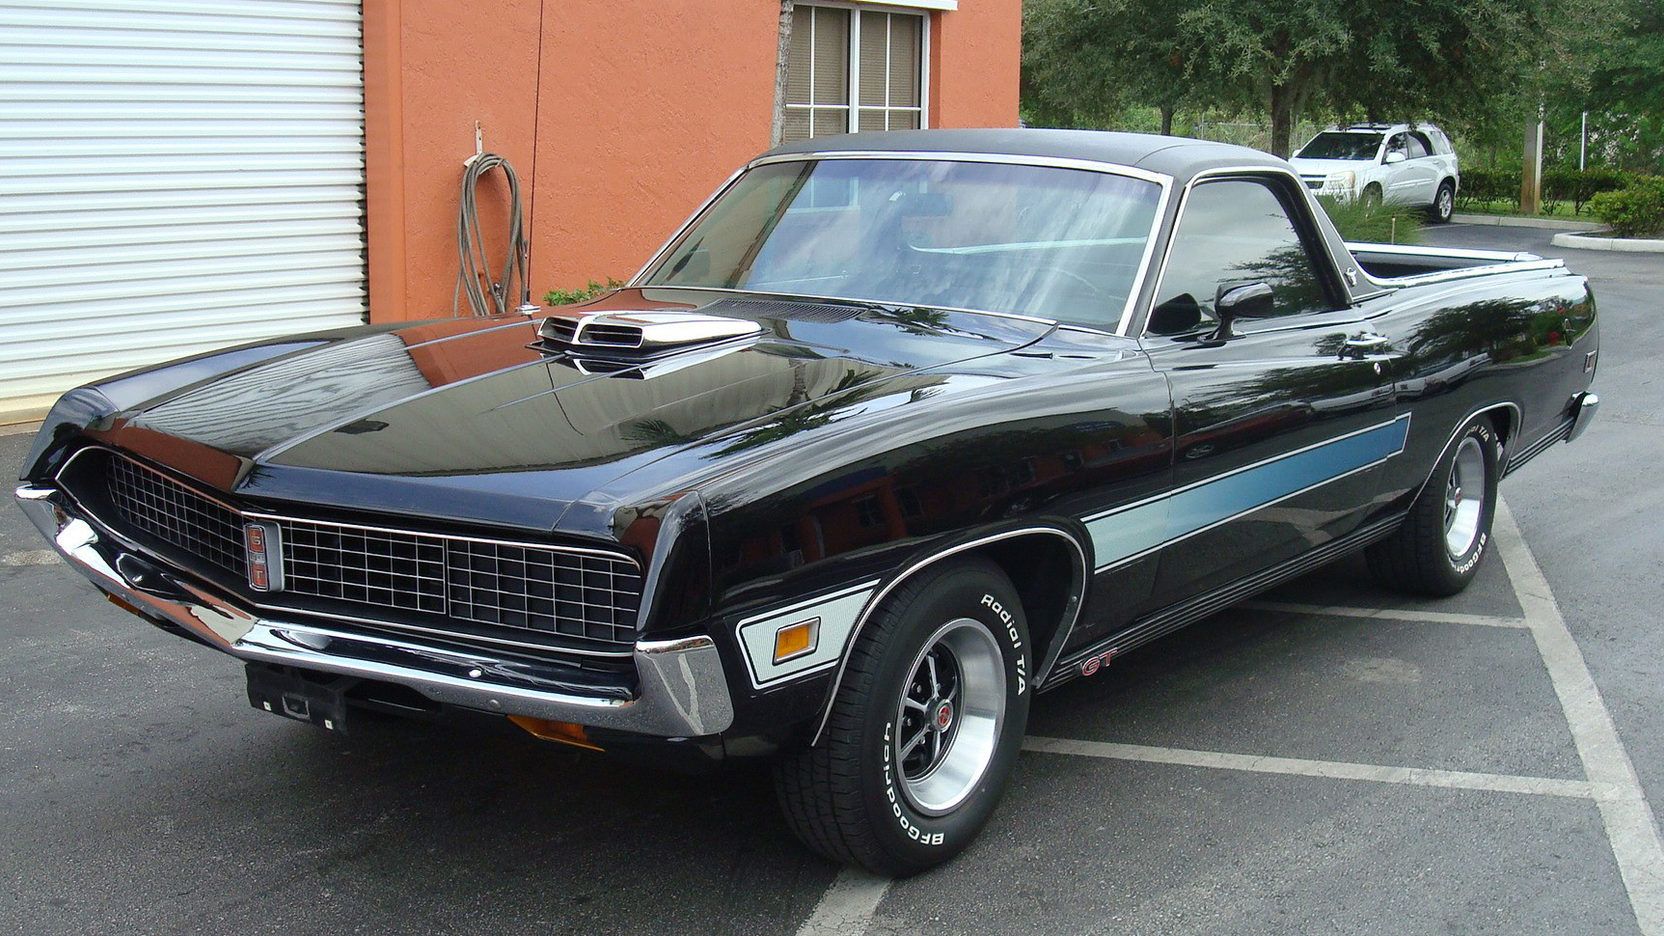 A parked 1971 Ford Ranchero GT